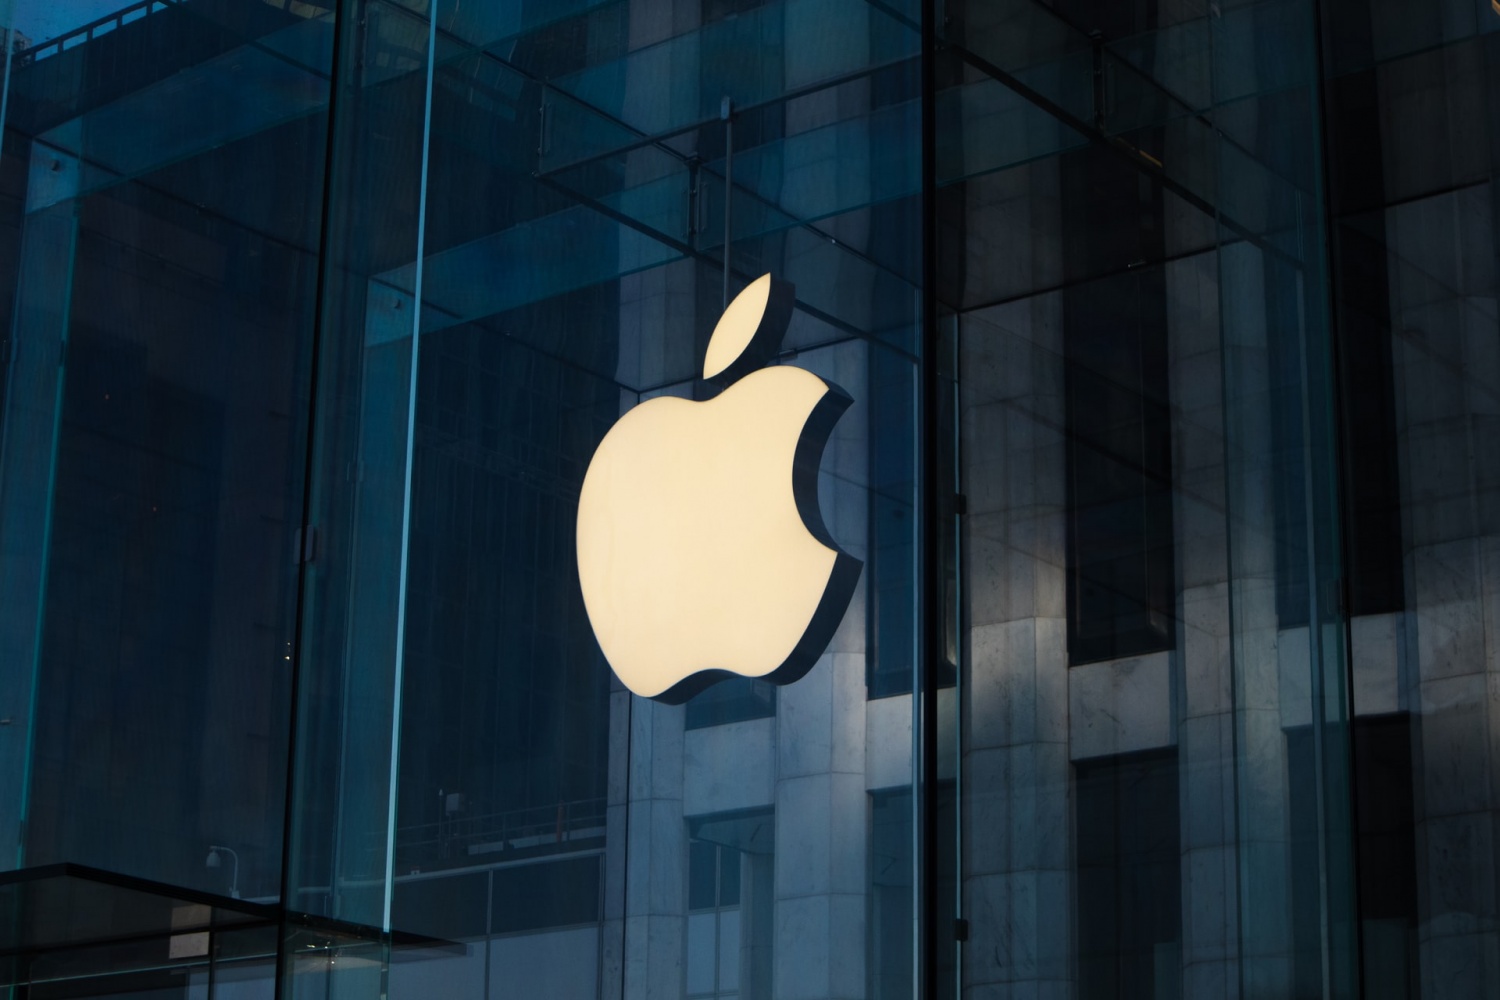 Apple Bans Browsing and Limits New York Stores to Just Pick-Ups Amidst Omicron Surge